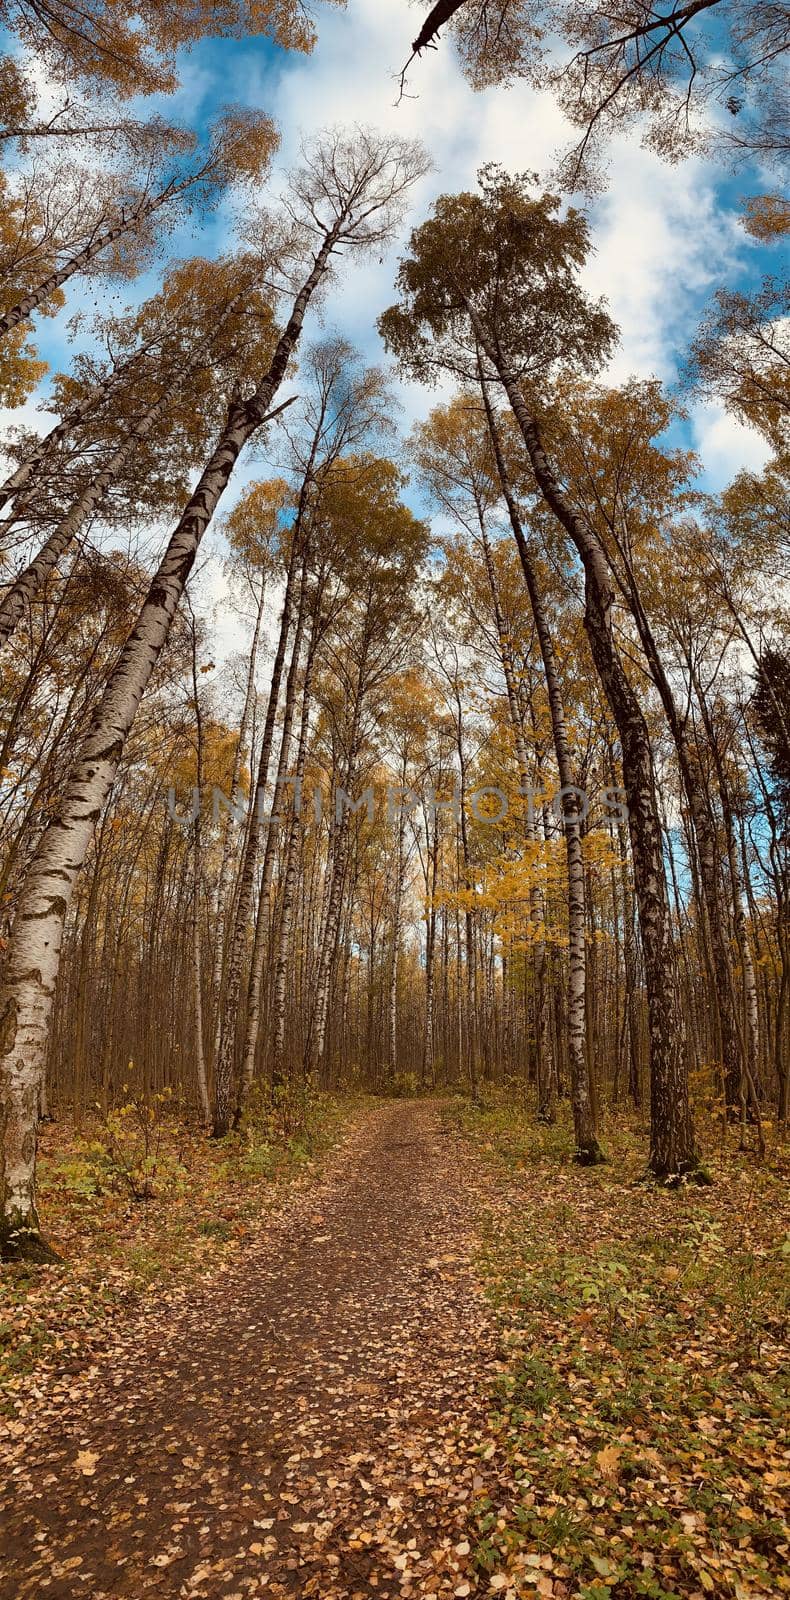 Vertical panoramic image, Yellow crowns, Panorama of first days of autumn in a park, blue sky, Buds of trees, Trunks of birches, sunny day, path in the woods, perspective